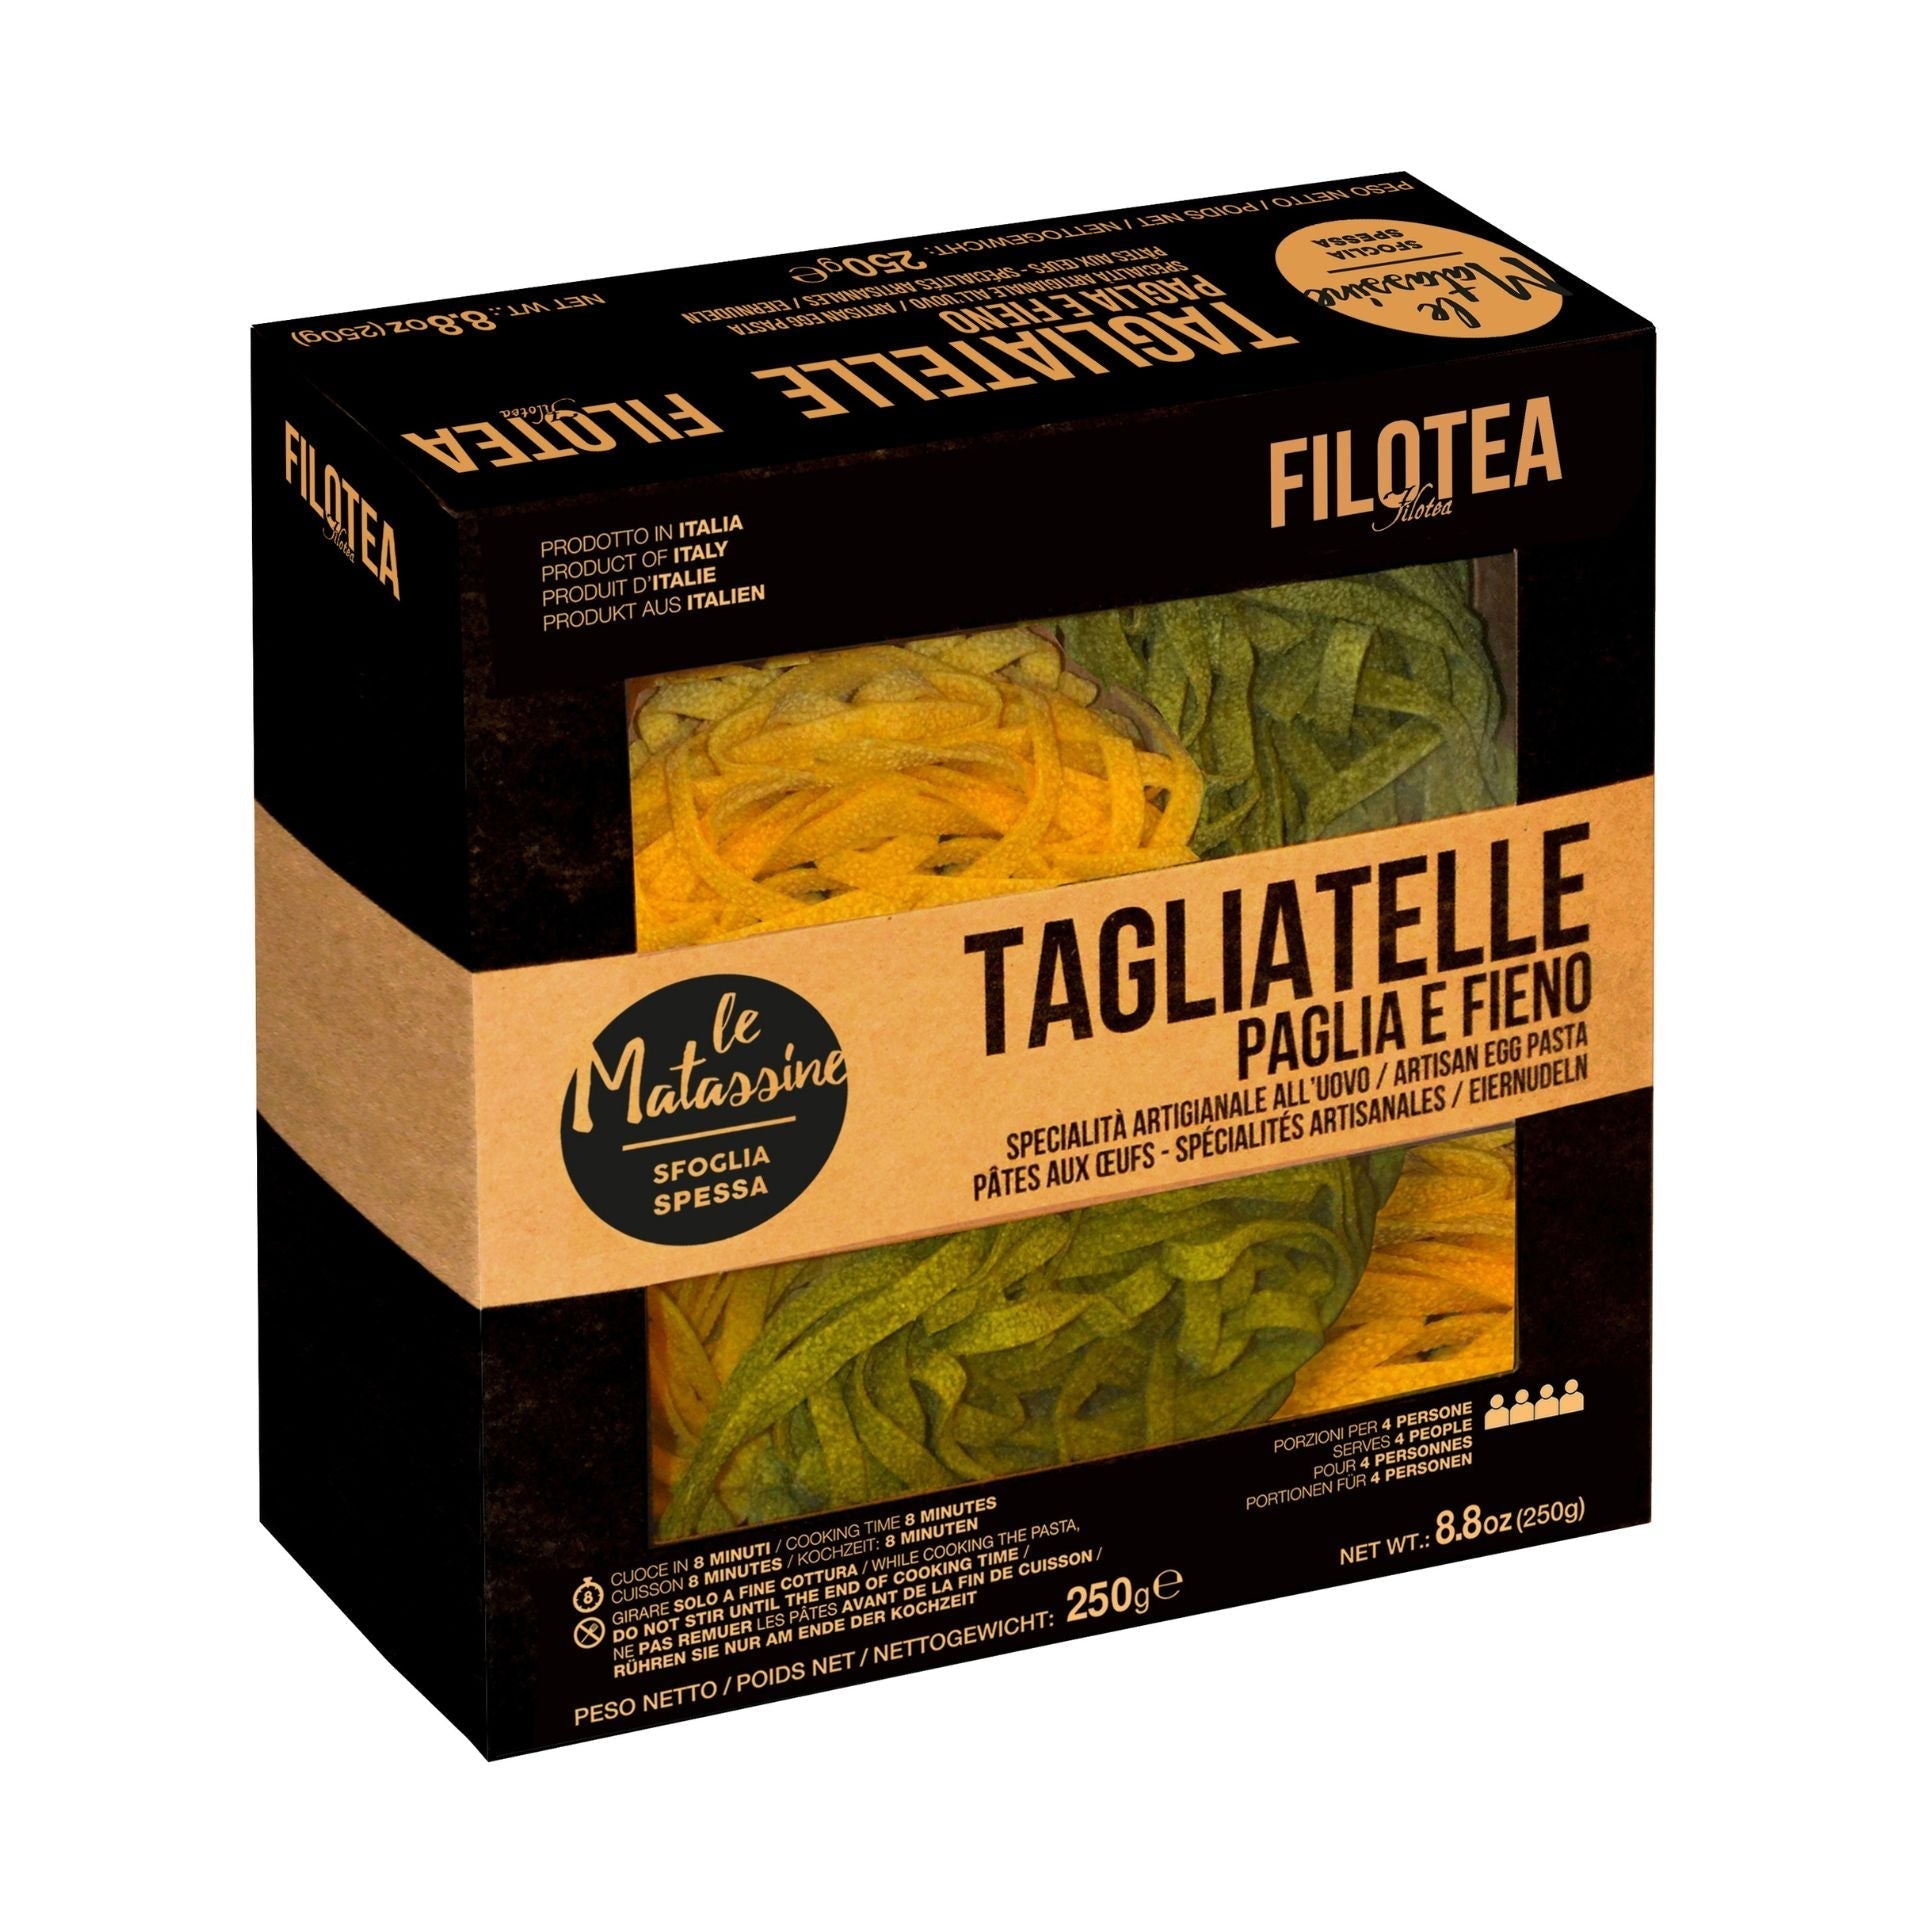 Filotea Le Matassine Tagliatelle Paglia e Fieno Nest Artisan Egg Pasta 250g  | Imported and distributed in the UK by Just Gourmet Foods